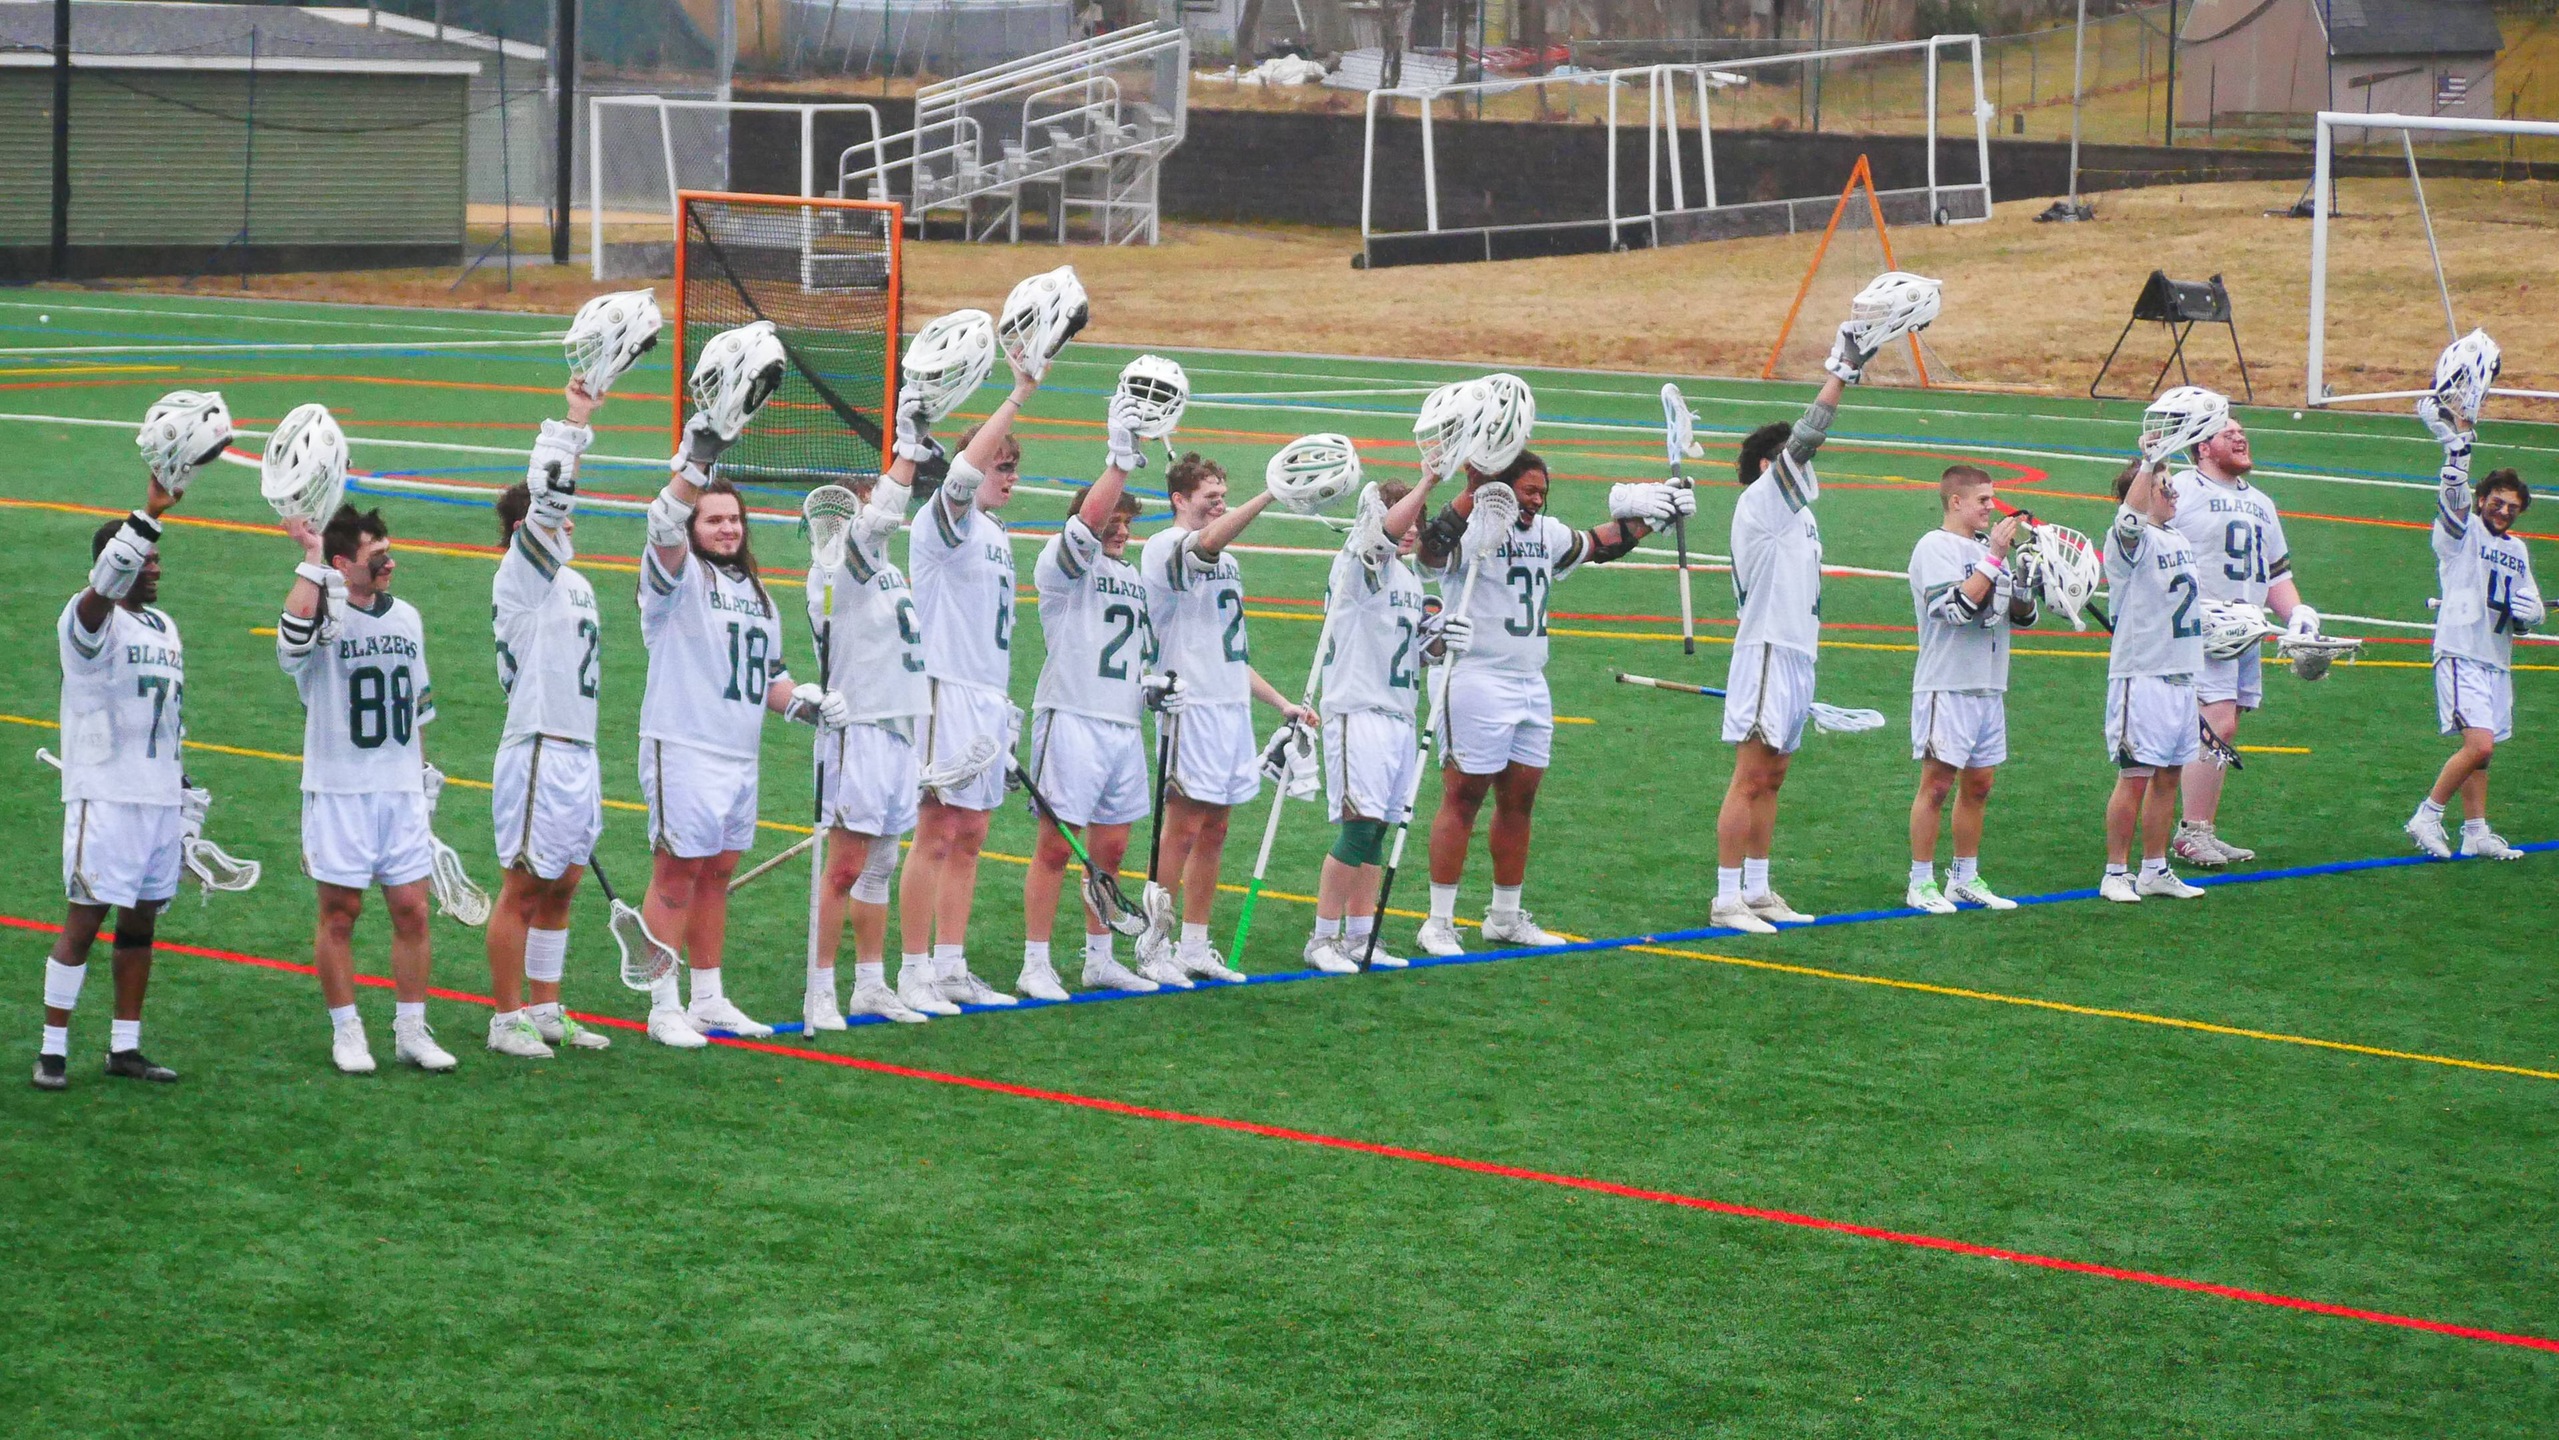 Men's Lacrosse Concludes Inaugural Season With a 13-5 Loss to the Pilgrims